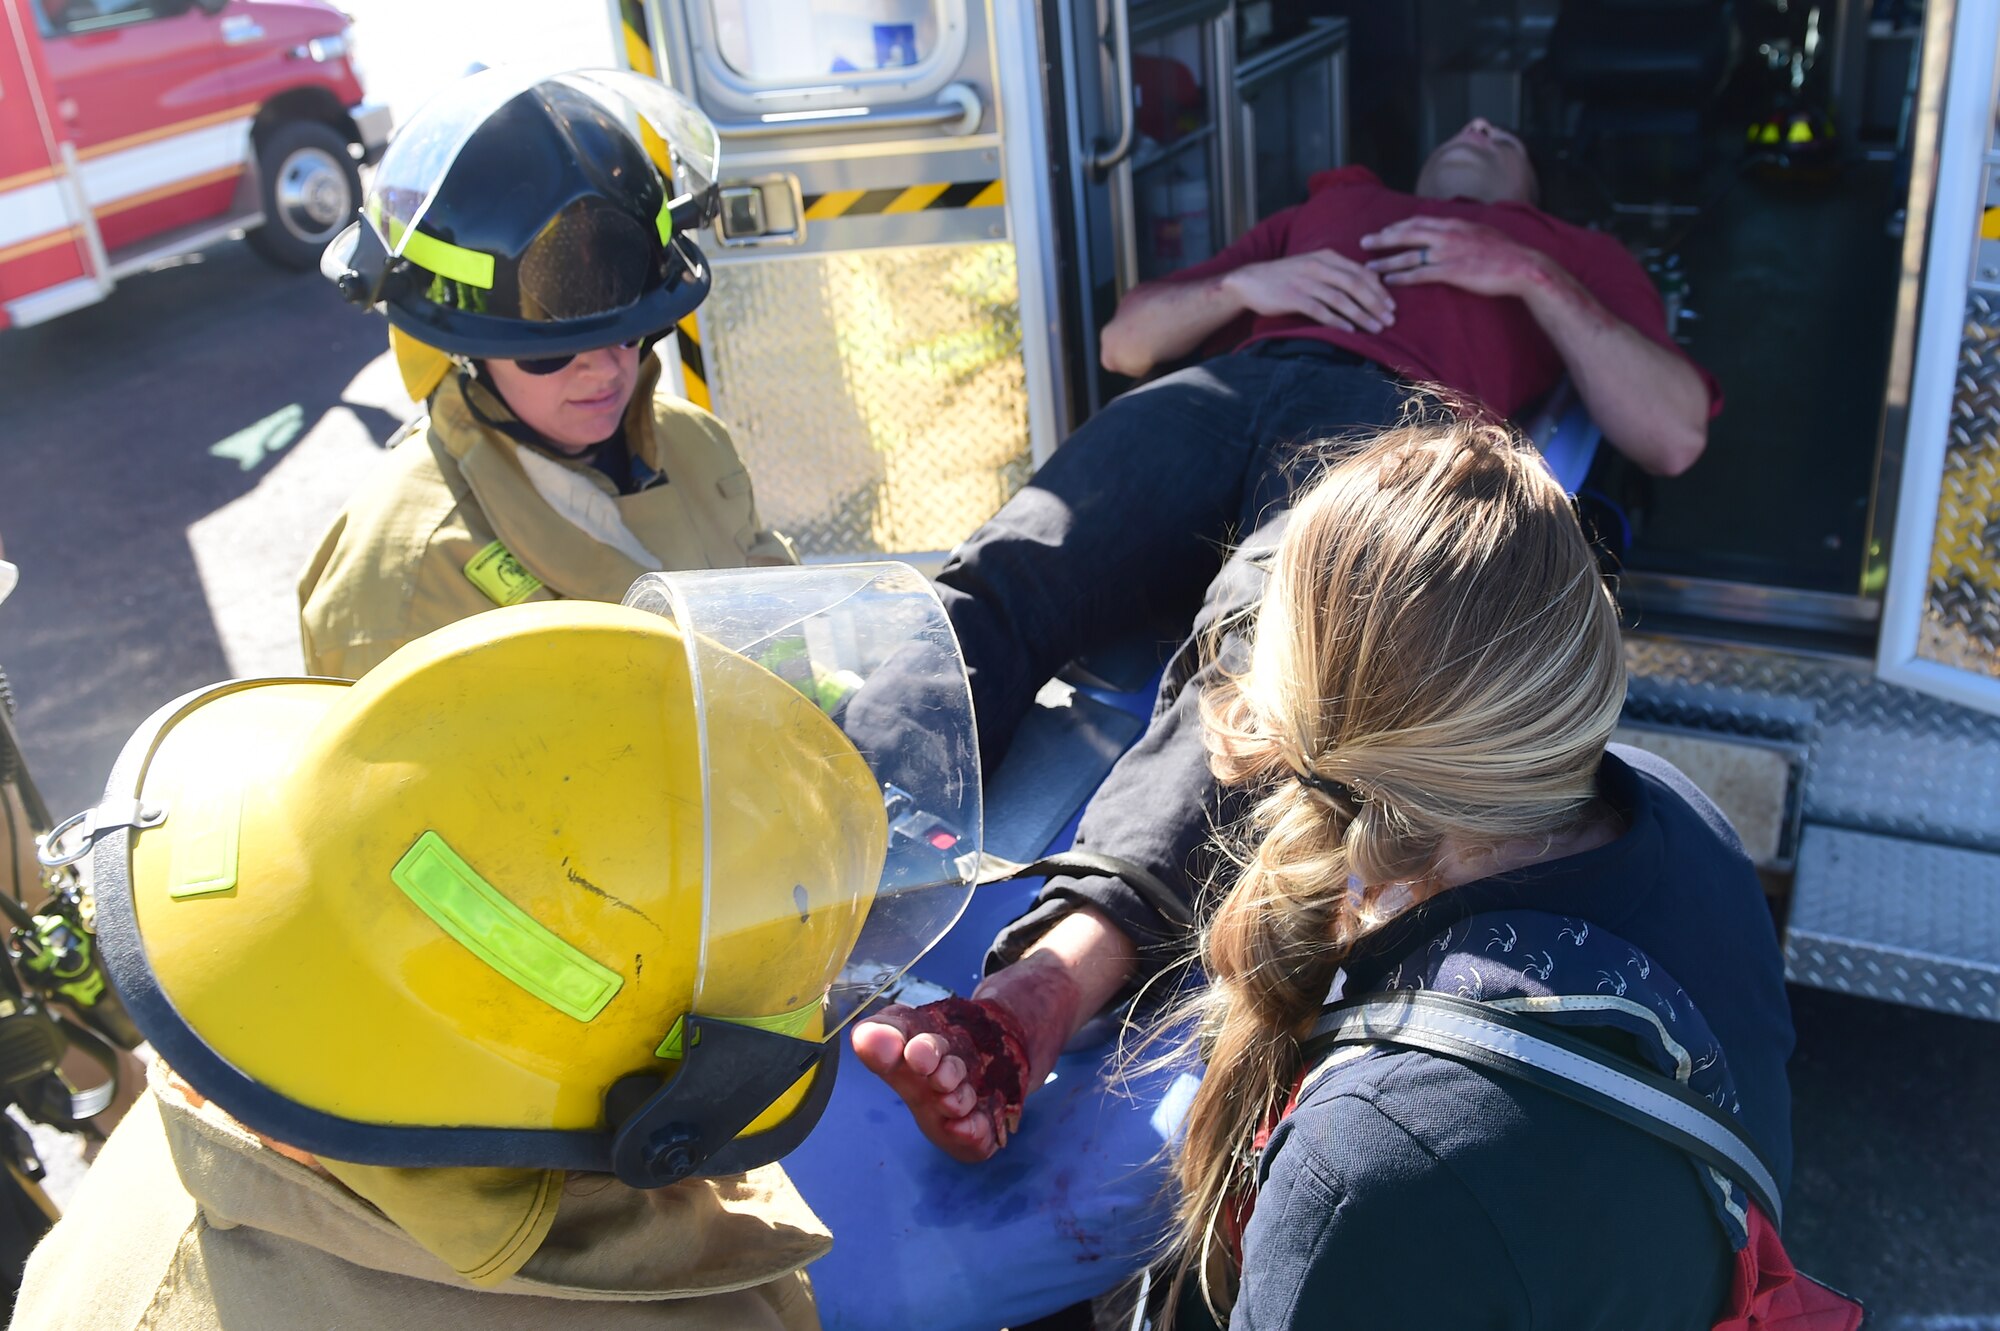 Bennett Fire Department first responders load a simulated casualty into the back of an ambulance Sept. 10, 2015, at Front Range Airport, Colo. A joint operation was conducted by Buckley Air Force Base personnel and surrounding community emergency responders during an annual major accident response exercise. (U.S. Air Force photo by Airman 1st Class Luke W. Nowakowski/Released) 